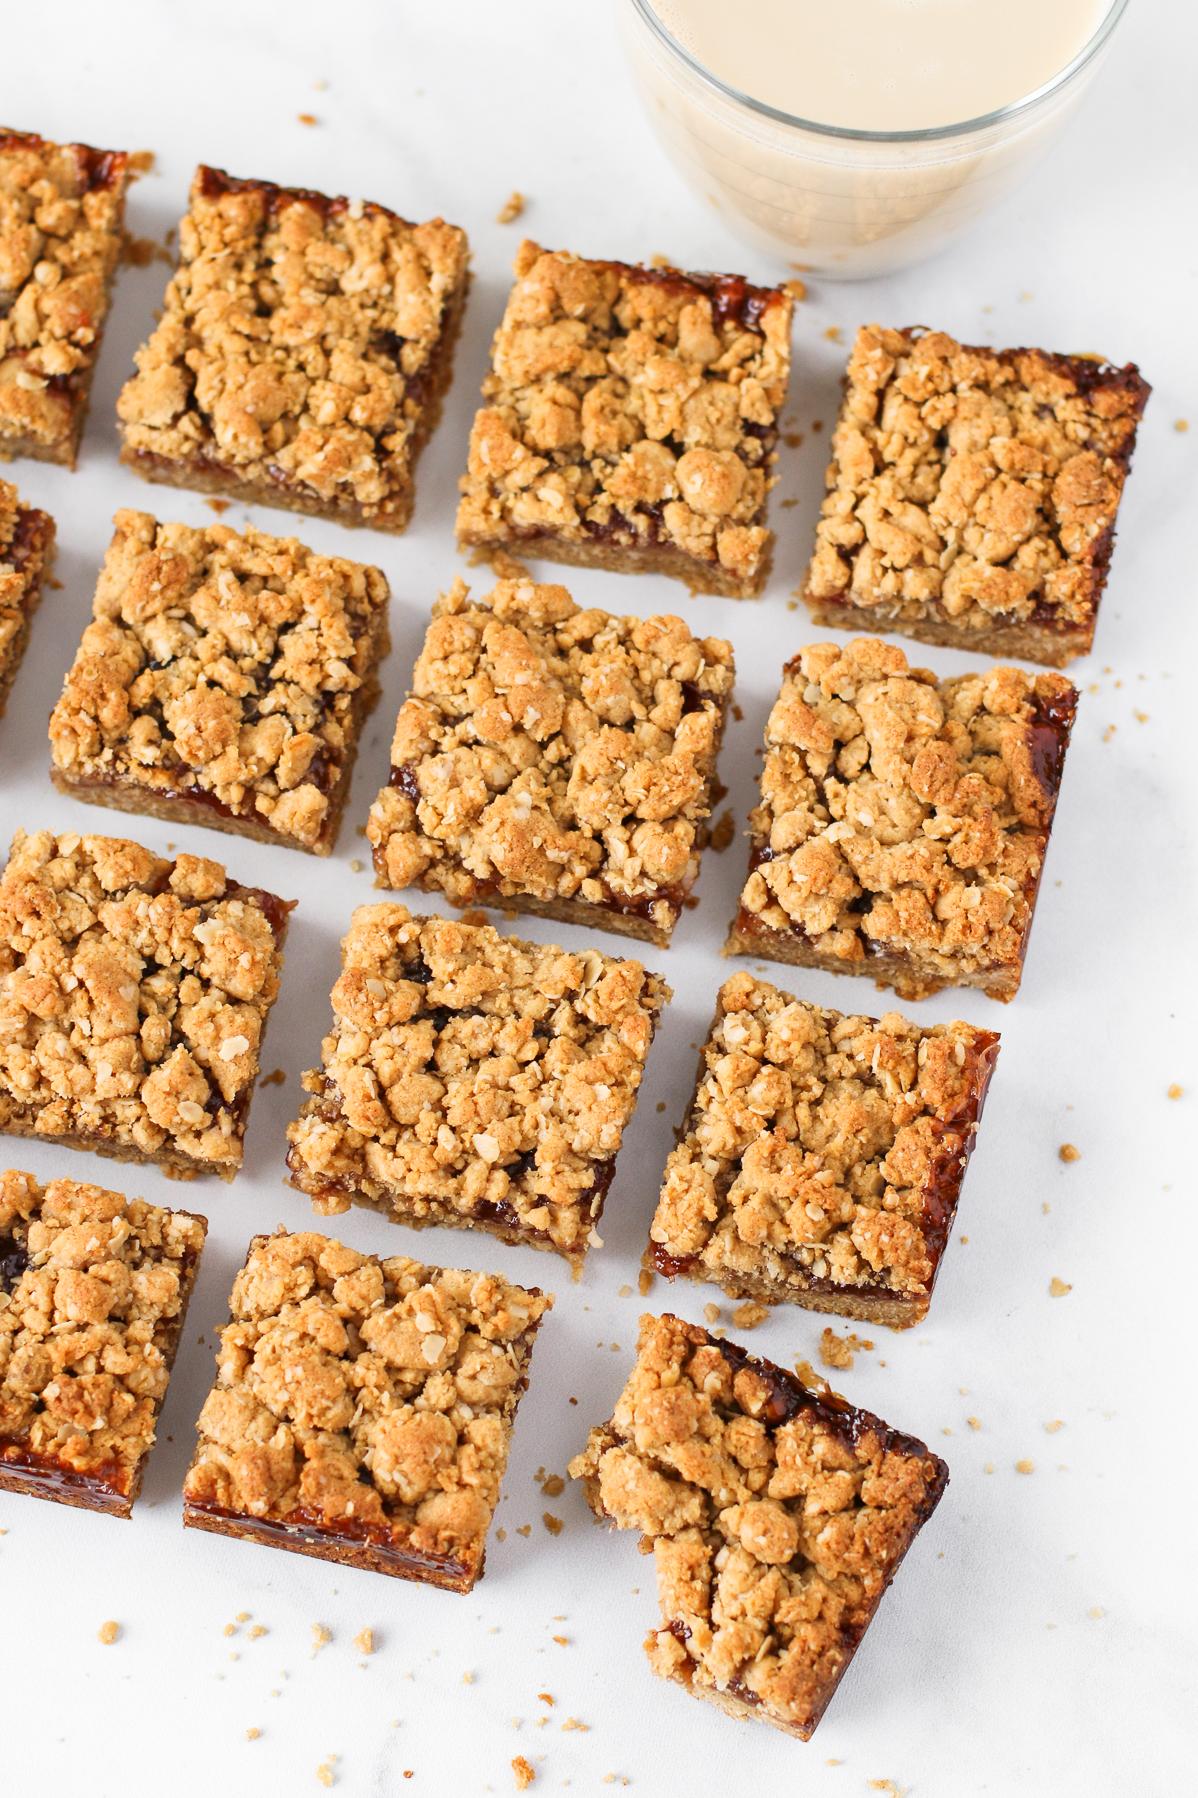  Cut these bars into bite-sized pieces for a perfect quick snack option, any time.